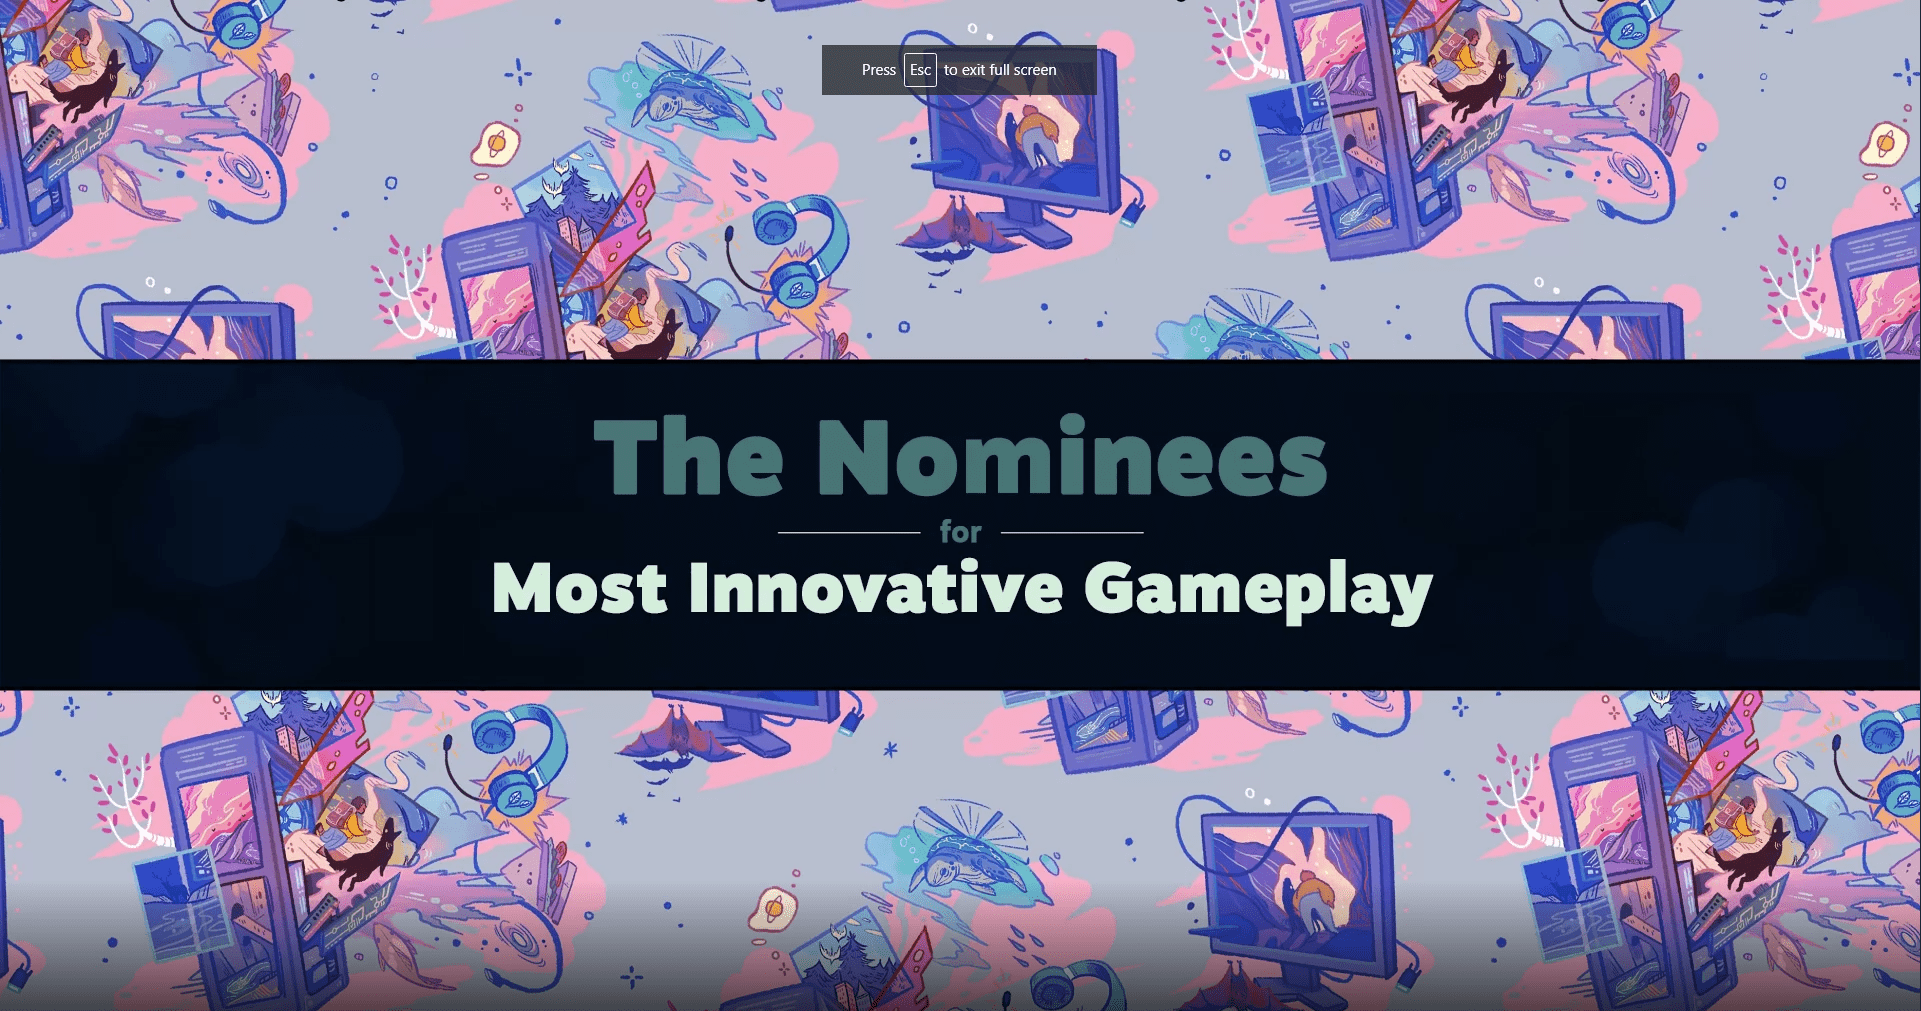 Steam Awards 2019 Fan Voted Nominees Revealed for Category ‘Most Innovative Gameplay’